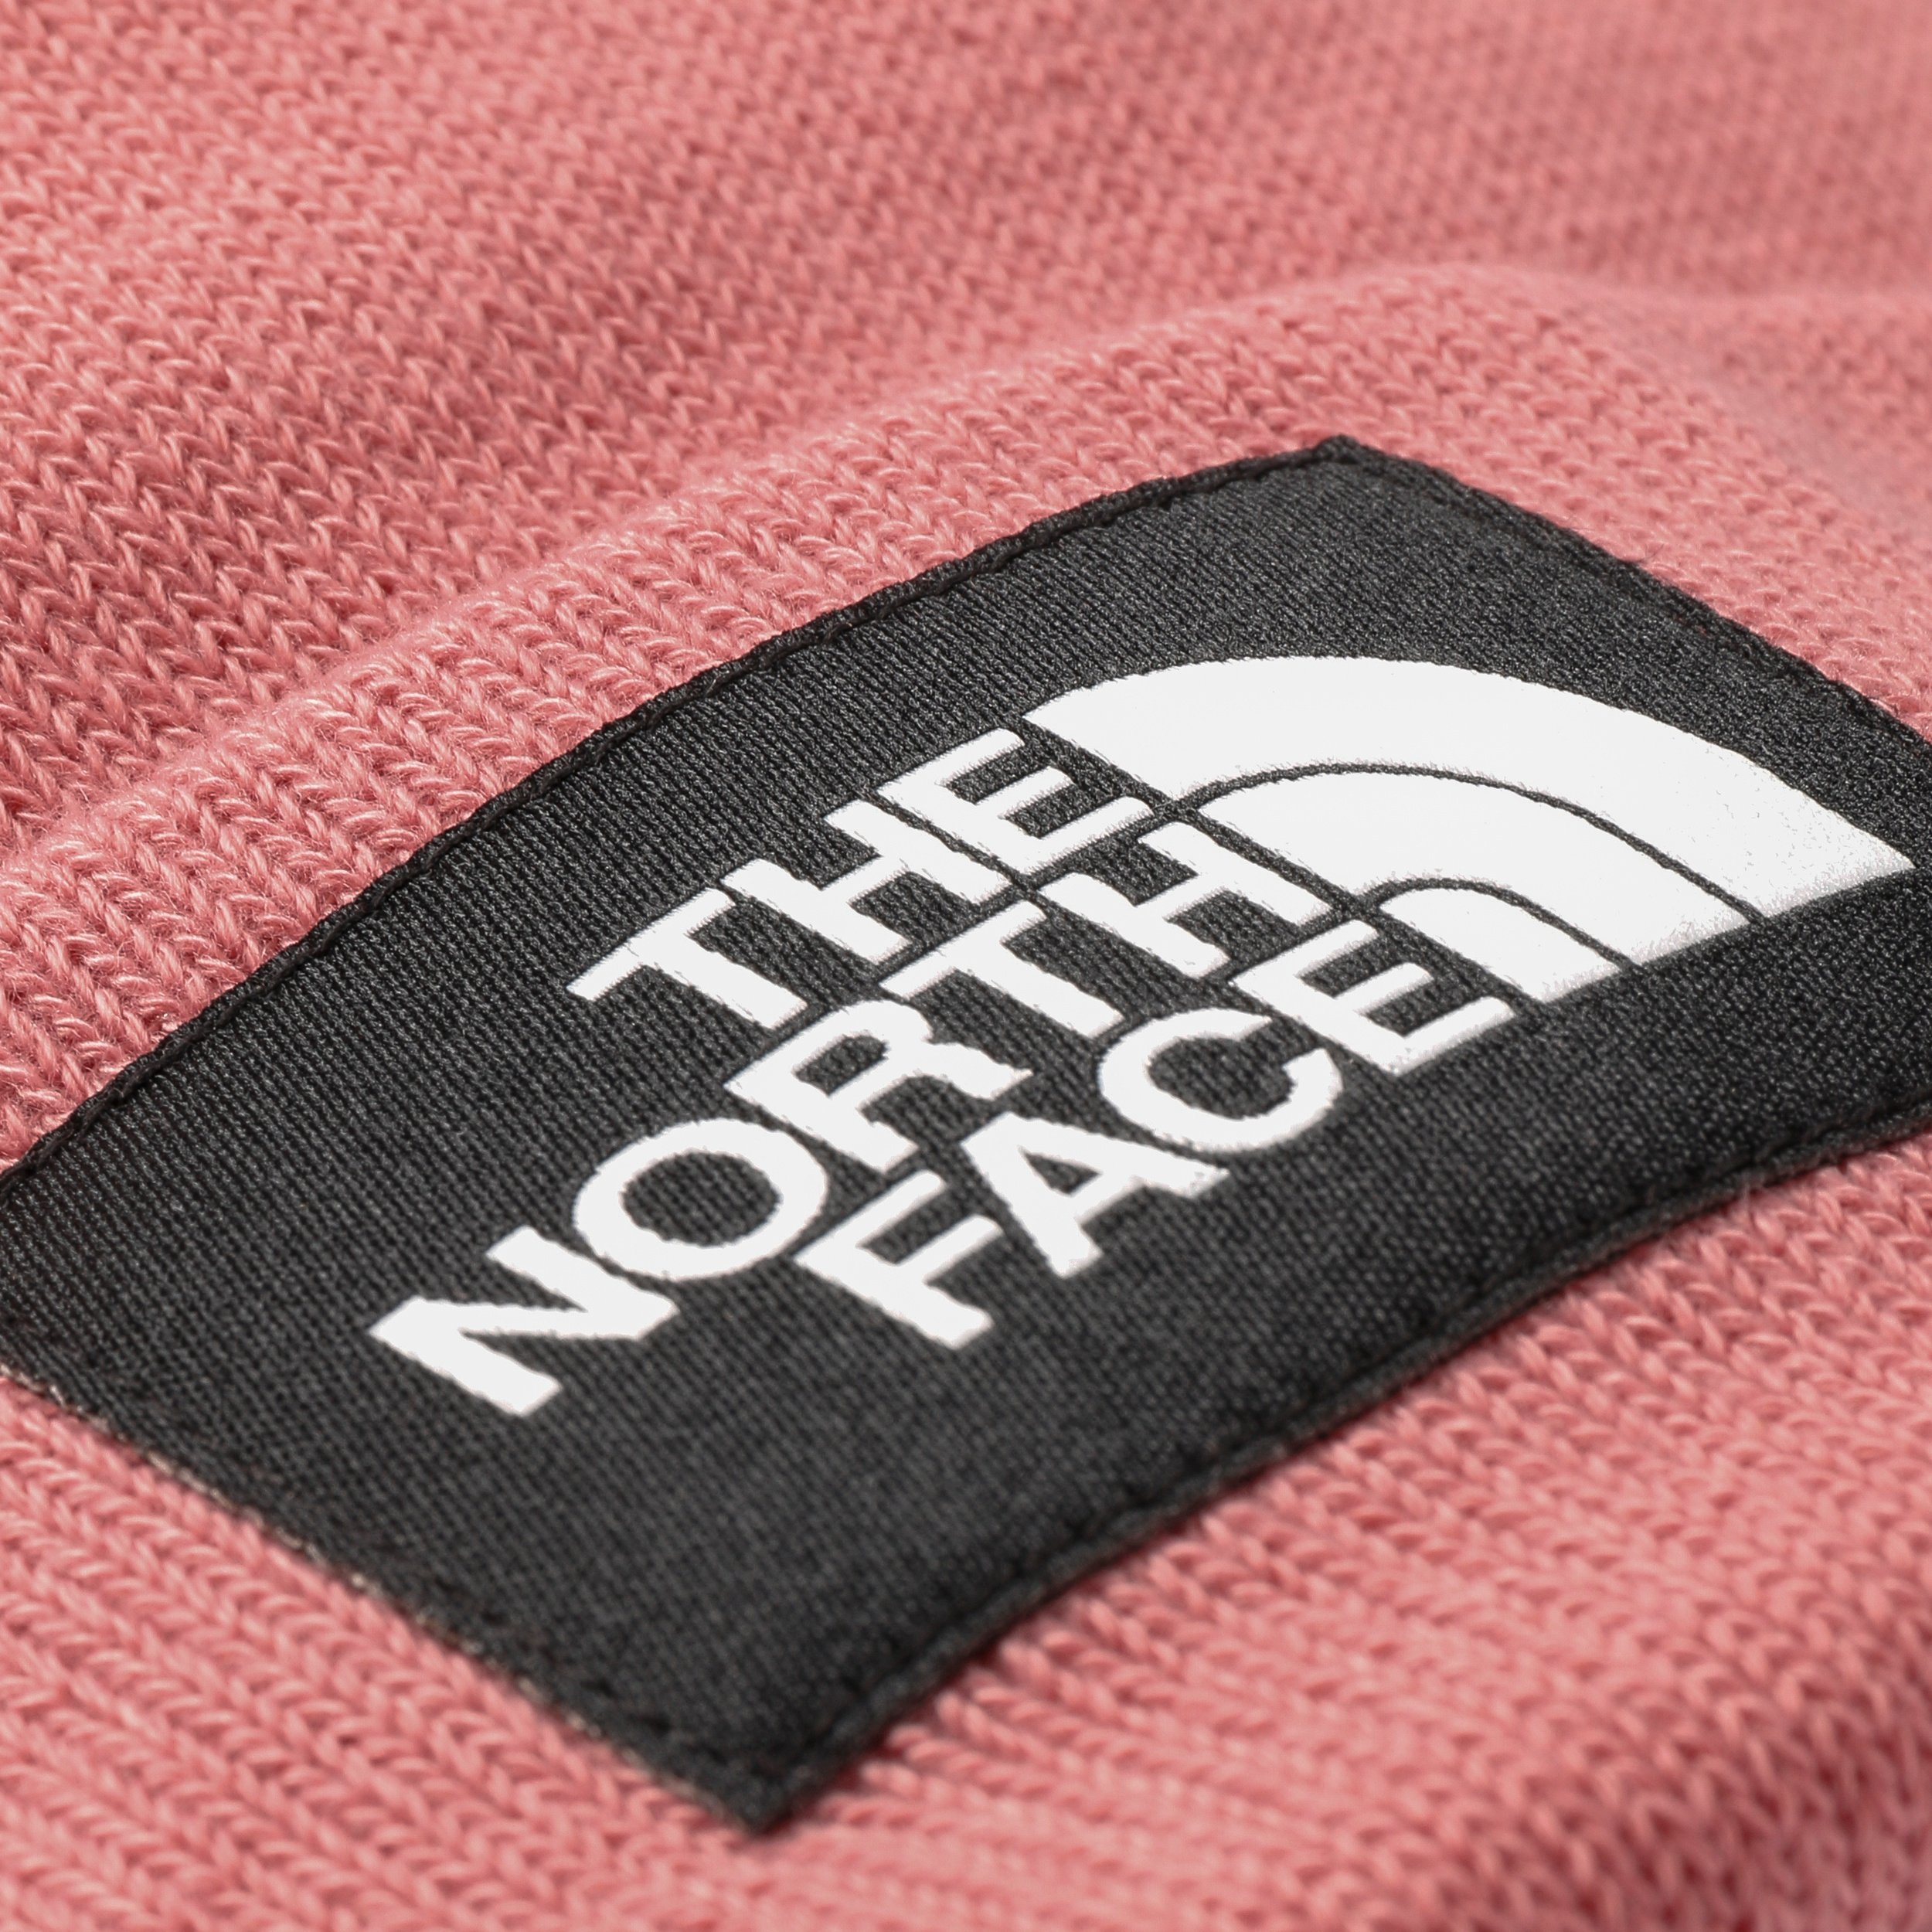 Bonnet Dock Worker Recycled by The North Face - 33,95 CHF